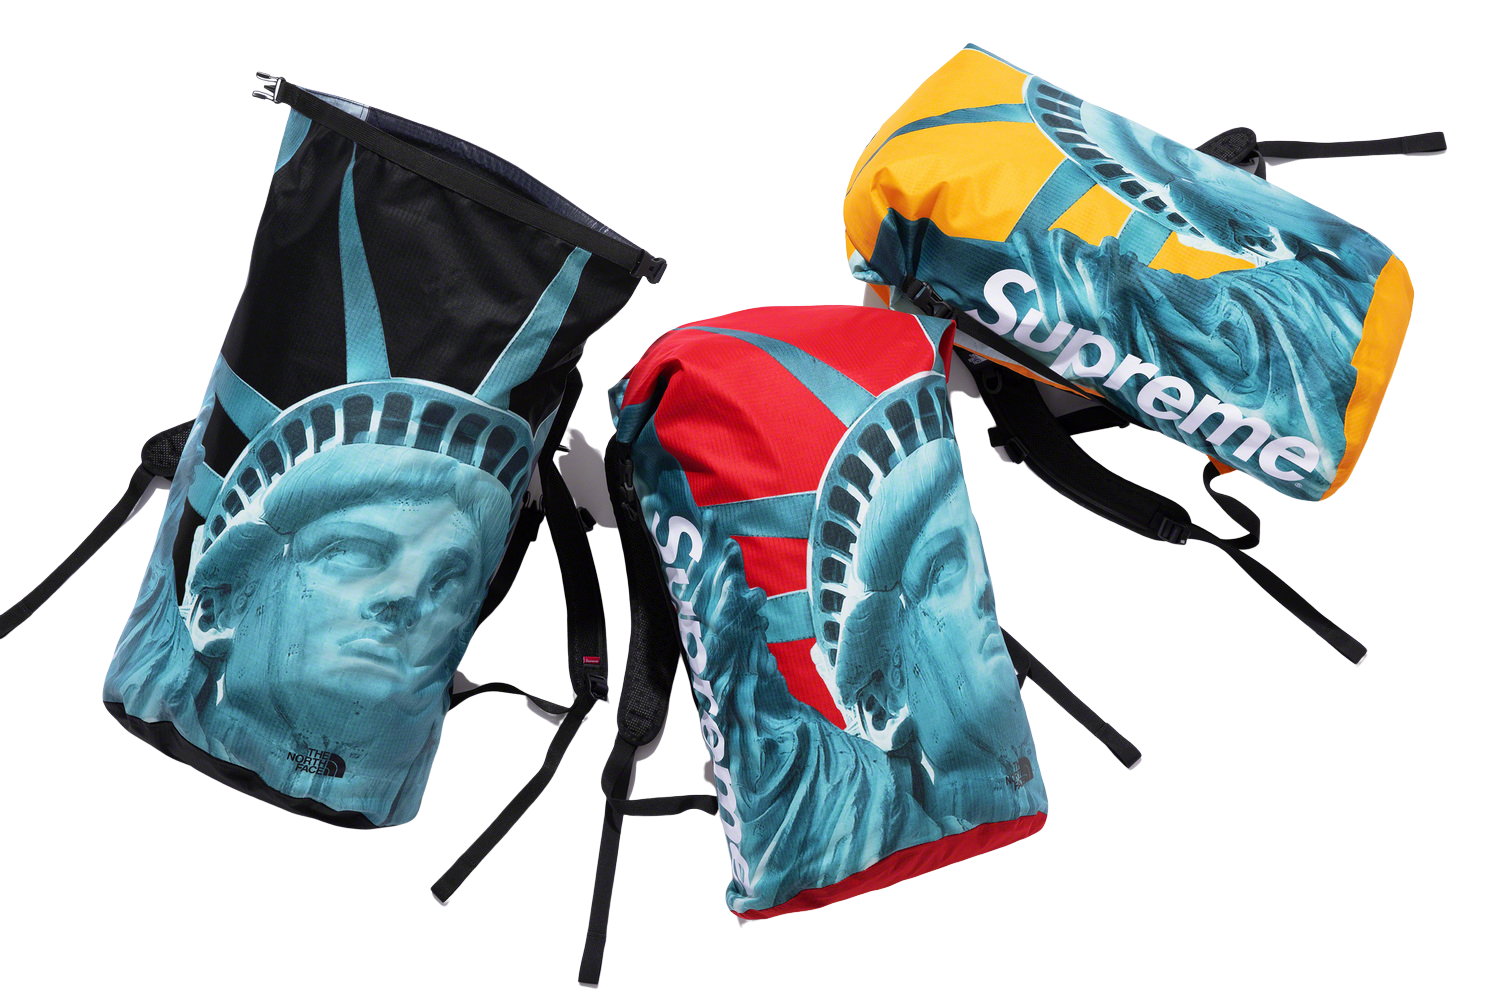 SUPREME x The North Face Statue of Liberty Waterproof Backpack Bag Rolltop  NEW